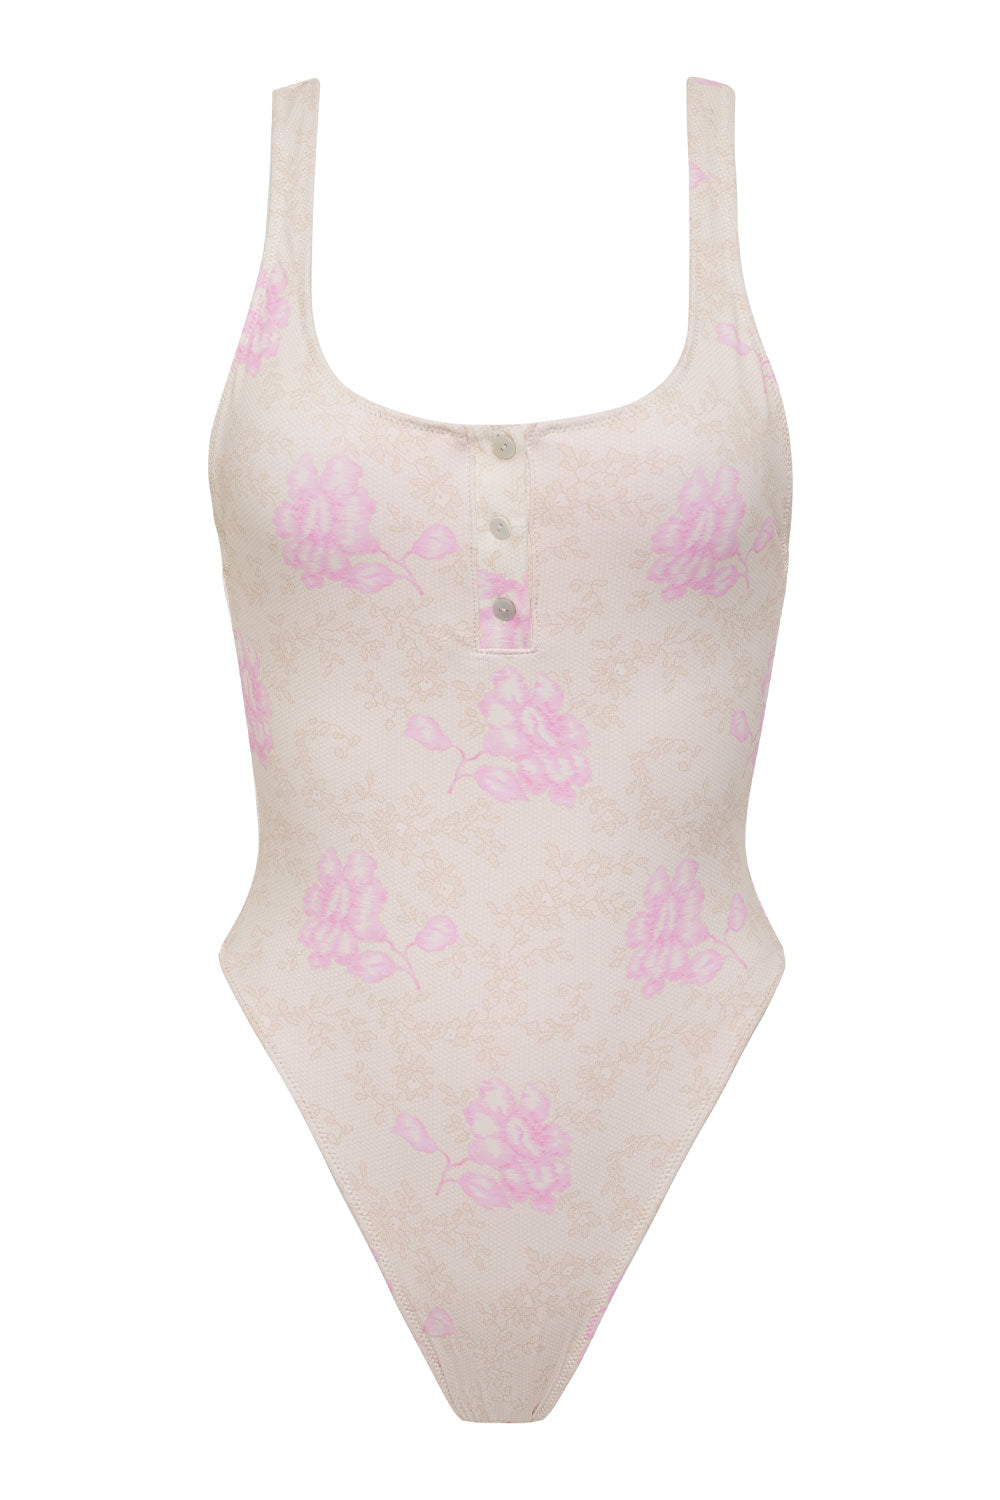 x PAMELA ANDERSON Pacific Cheeky One Piece Swimsuit - Lace on the Beach